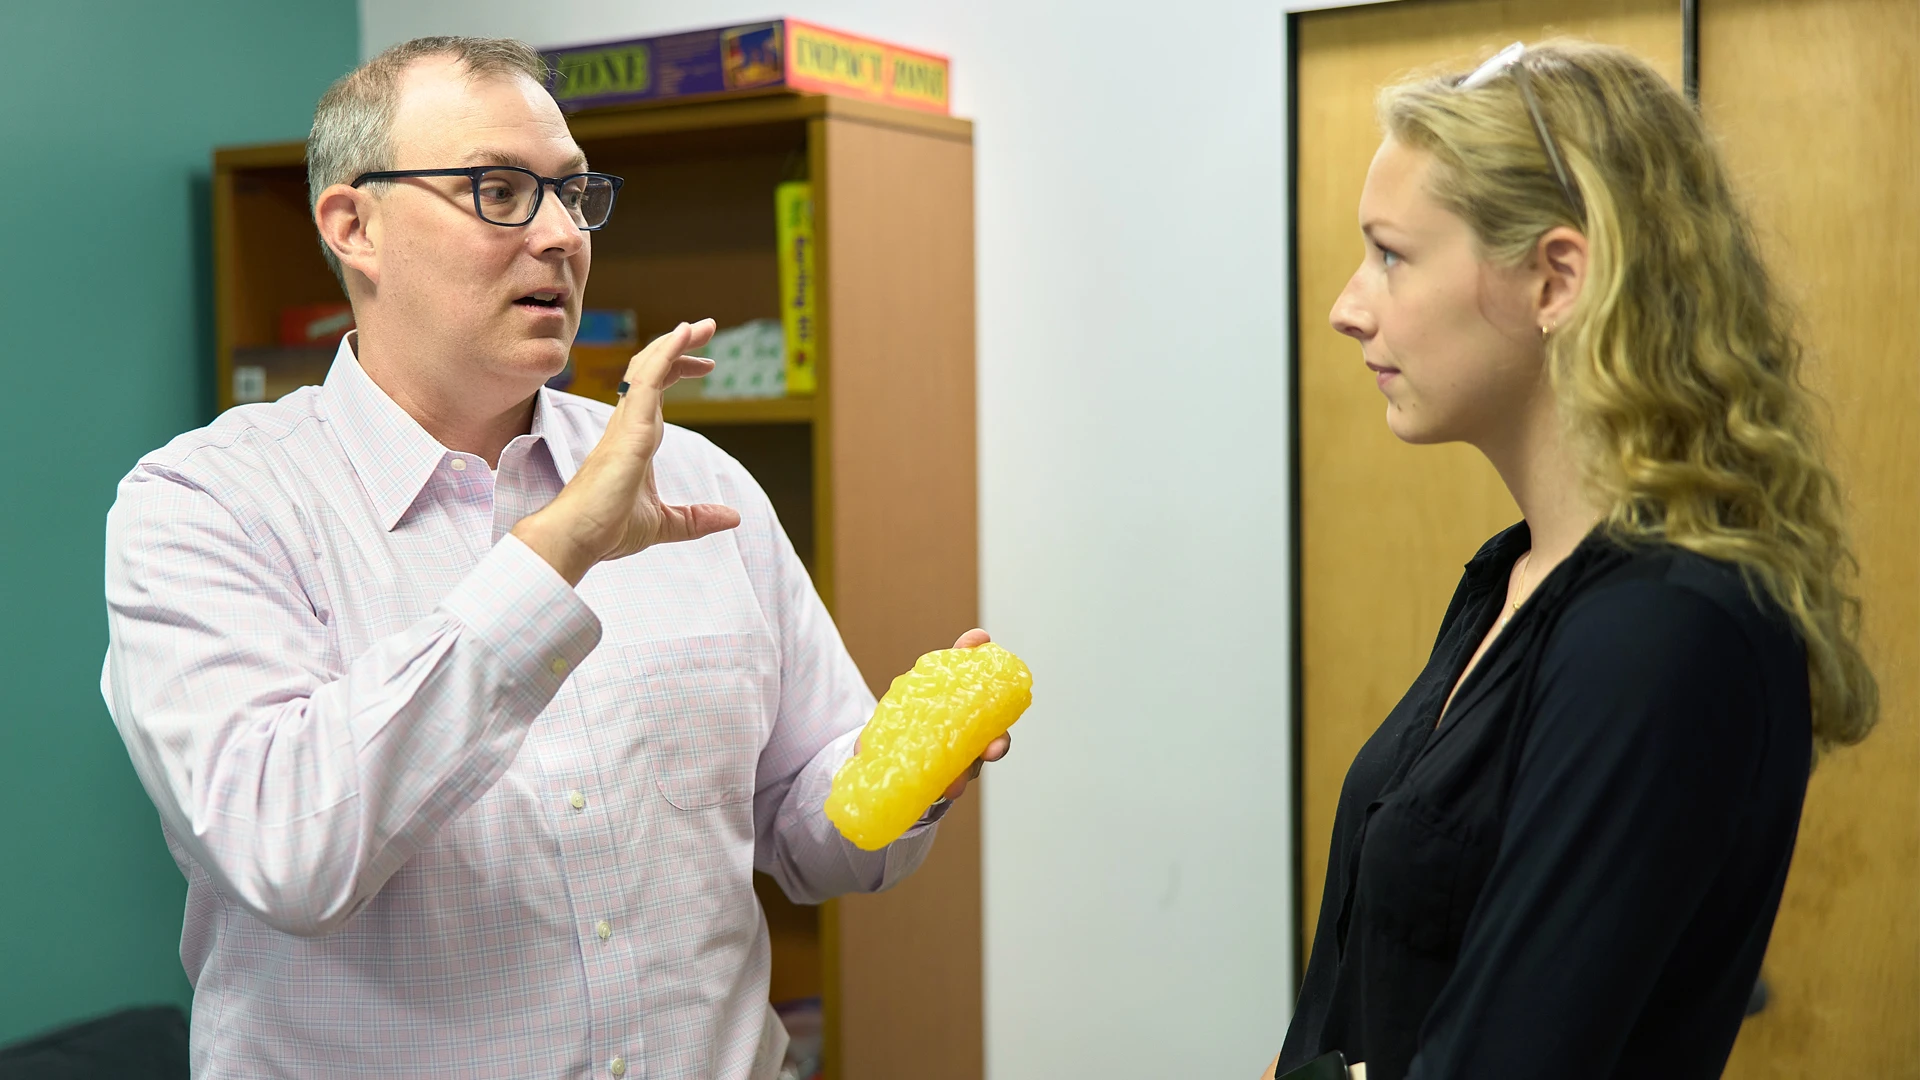 Dr. Hildebrandt (left) demonstrating to Webb (right) the use of a "blob," a gelatinous mass used in an intervention known as interoceptive exposure.